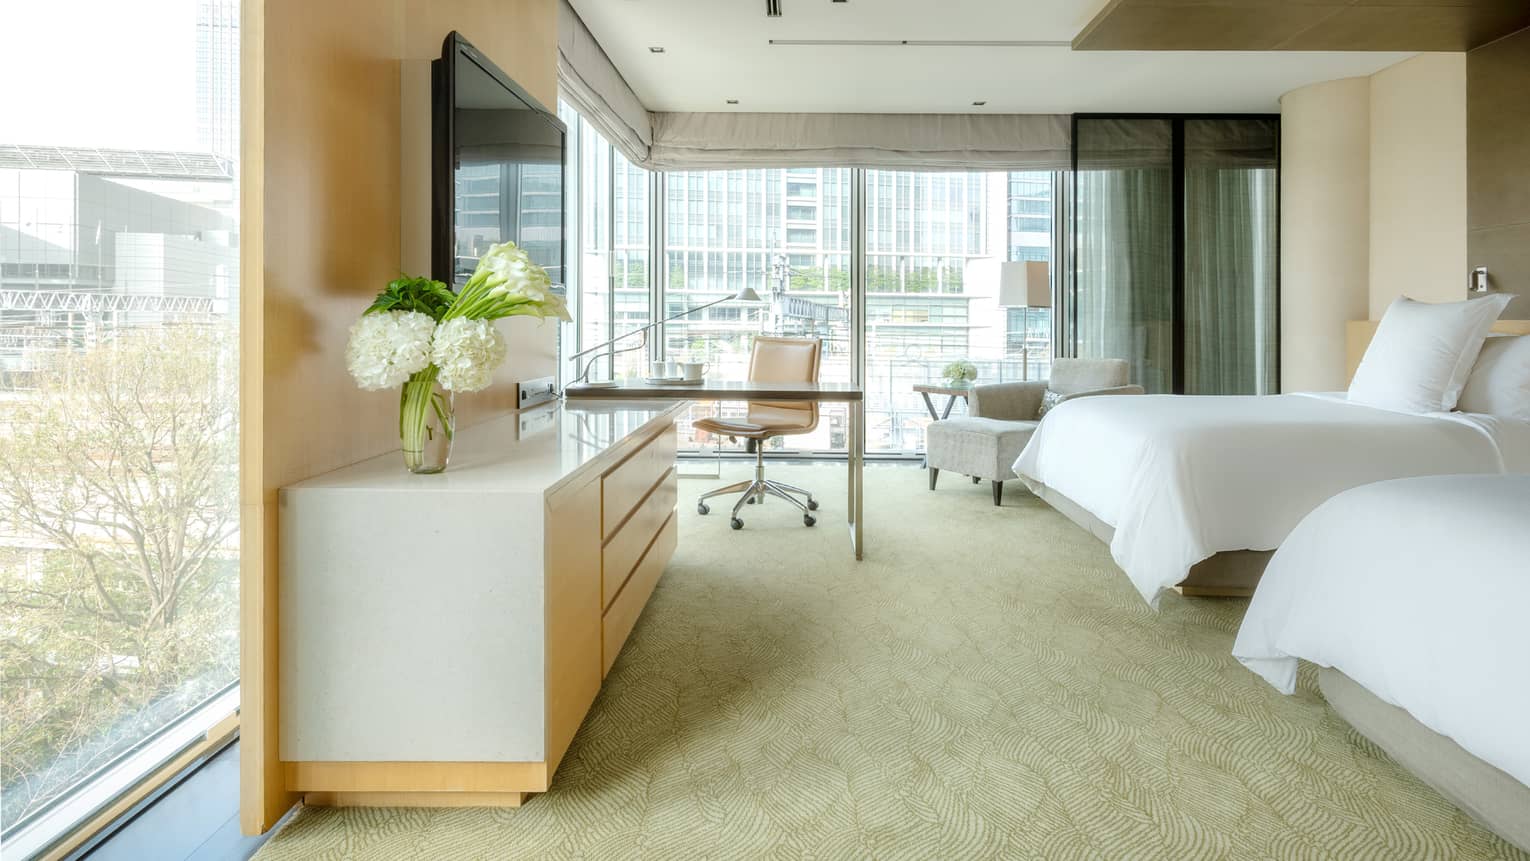 Deluxe Premier Twin Room with desk area and floor-to-ceiling corner windows looking out onto the city skyline